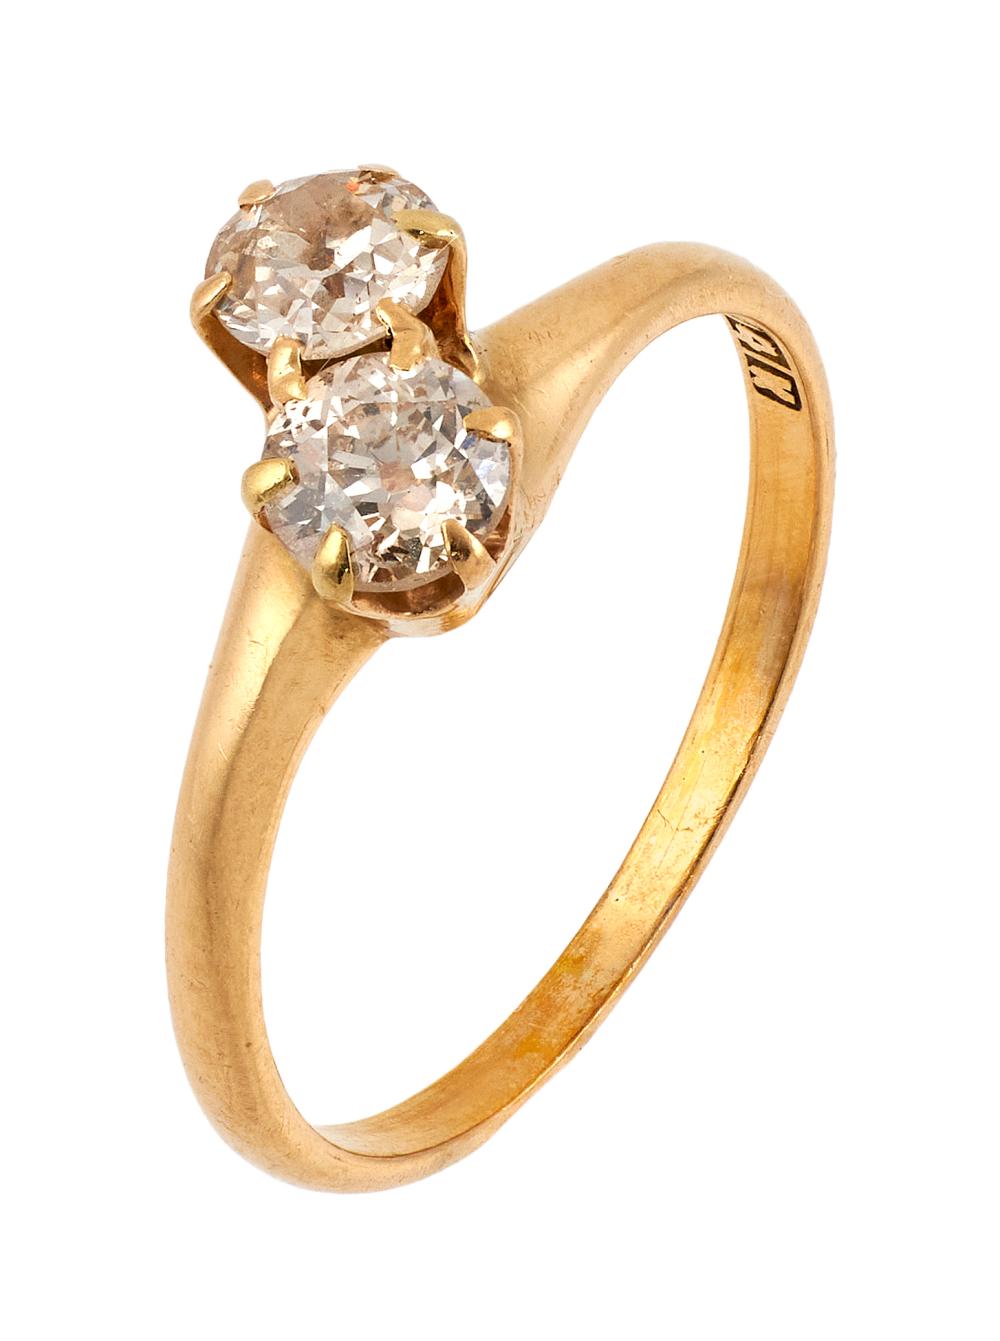 14KT YELLOW GOLD AND DIAMOND BYPASS